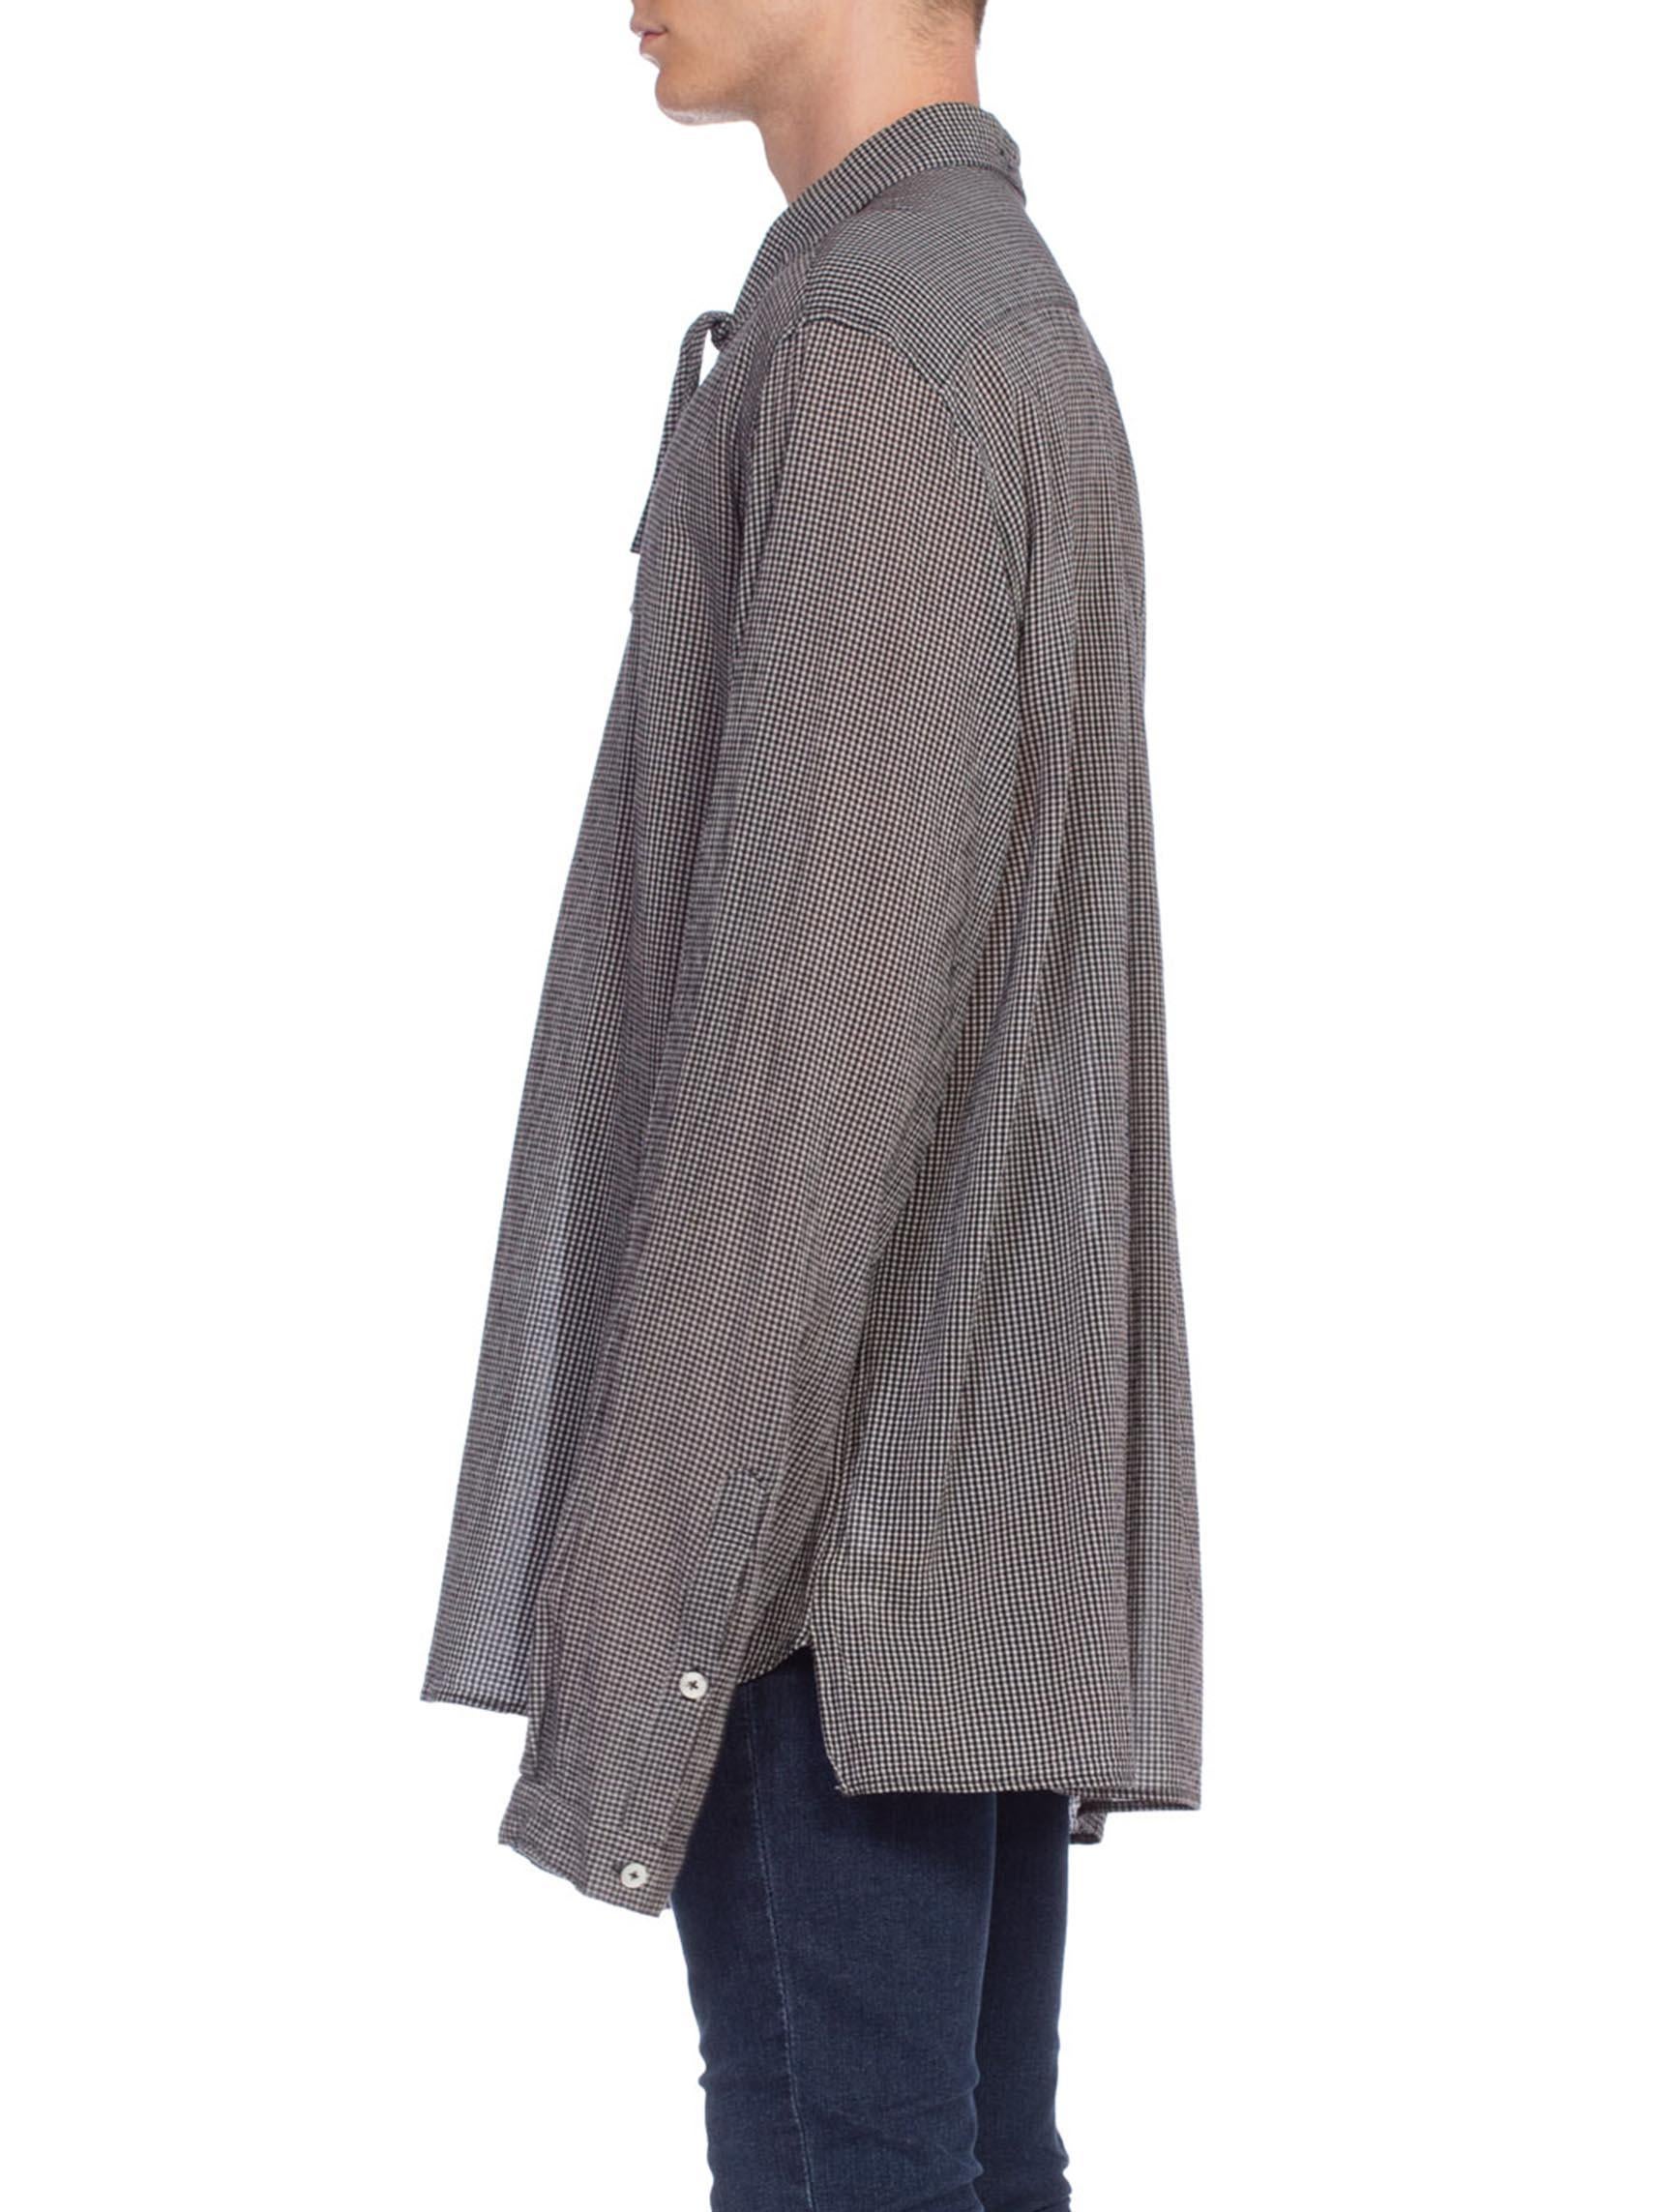 2000S ANN DEMEULEMEESTER Rayon Crepe Men's Oversized Bow Neck Shirt In Excellent Condition For Sale In New York, NY